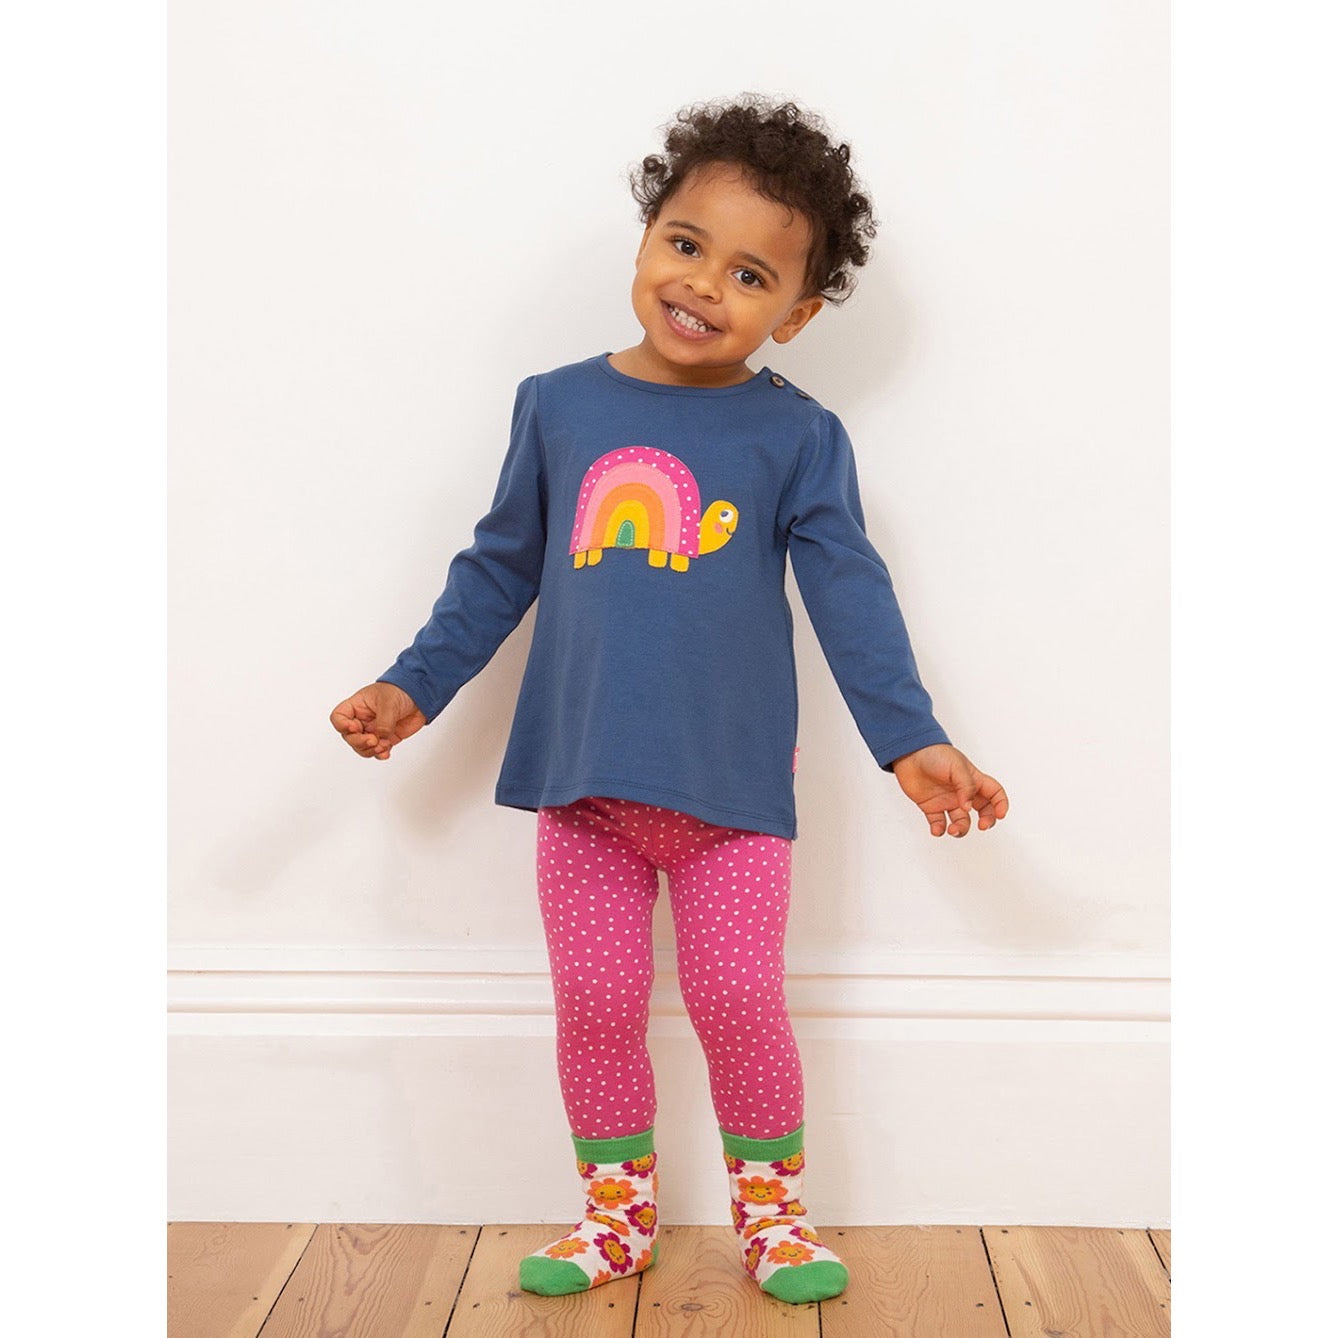 Kite Marvellous Me Infant Tunic Top 9962 Clothing 3-6M / Navy,6-9M / Navy,9-12M / Navy,12-18M / Navy,18-24M/2Y / Navy,3YRS / Navy,4YRS / Navy,5YRS / Navy